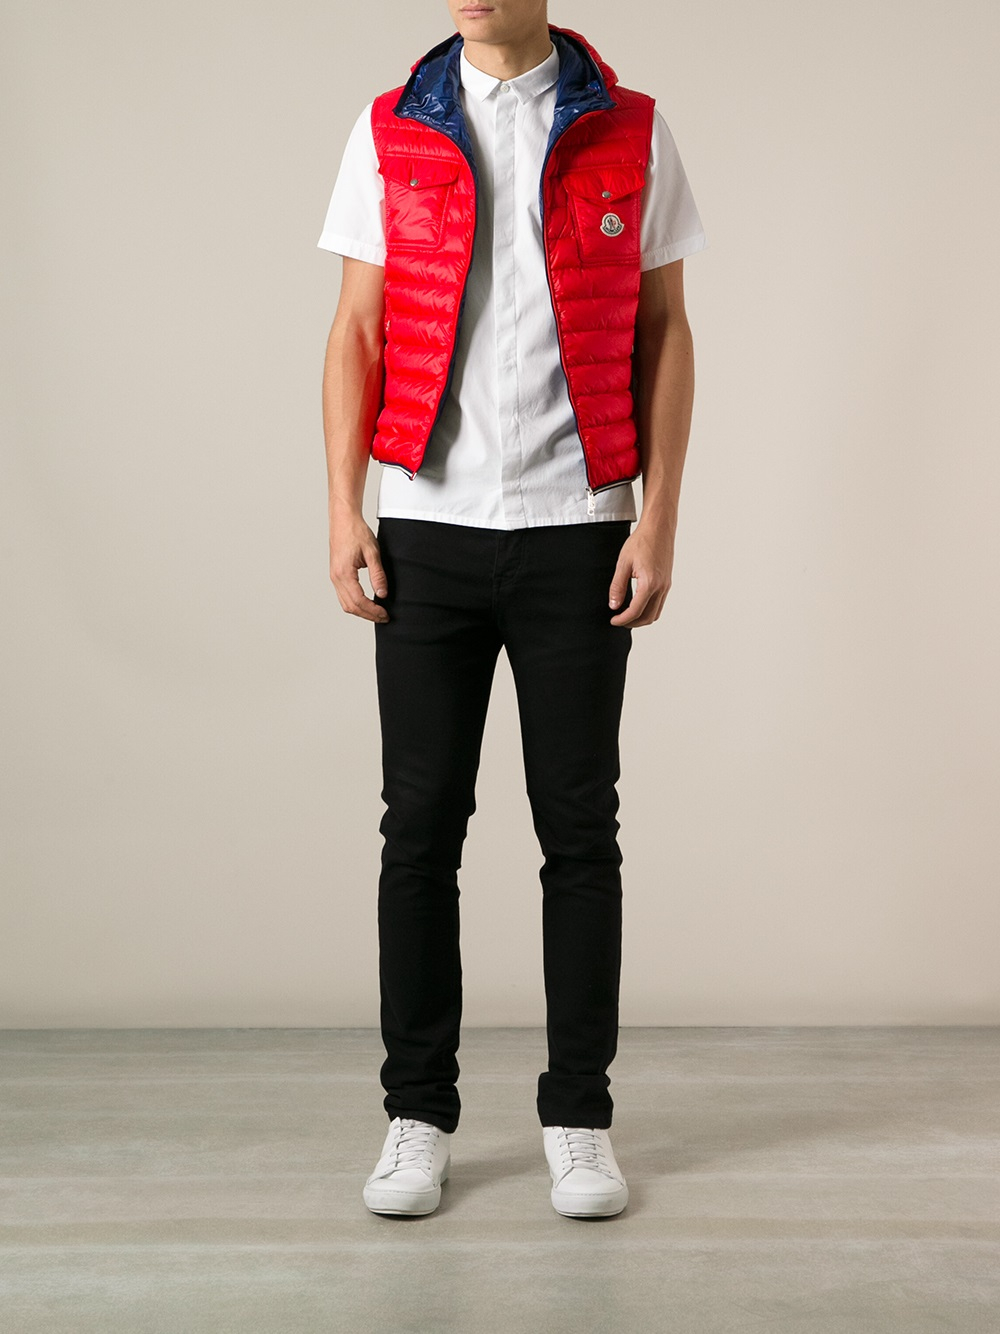 Moncler Gers Down Gilet in Red for Men - Lyst